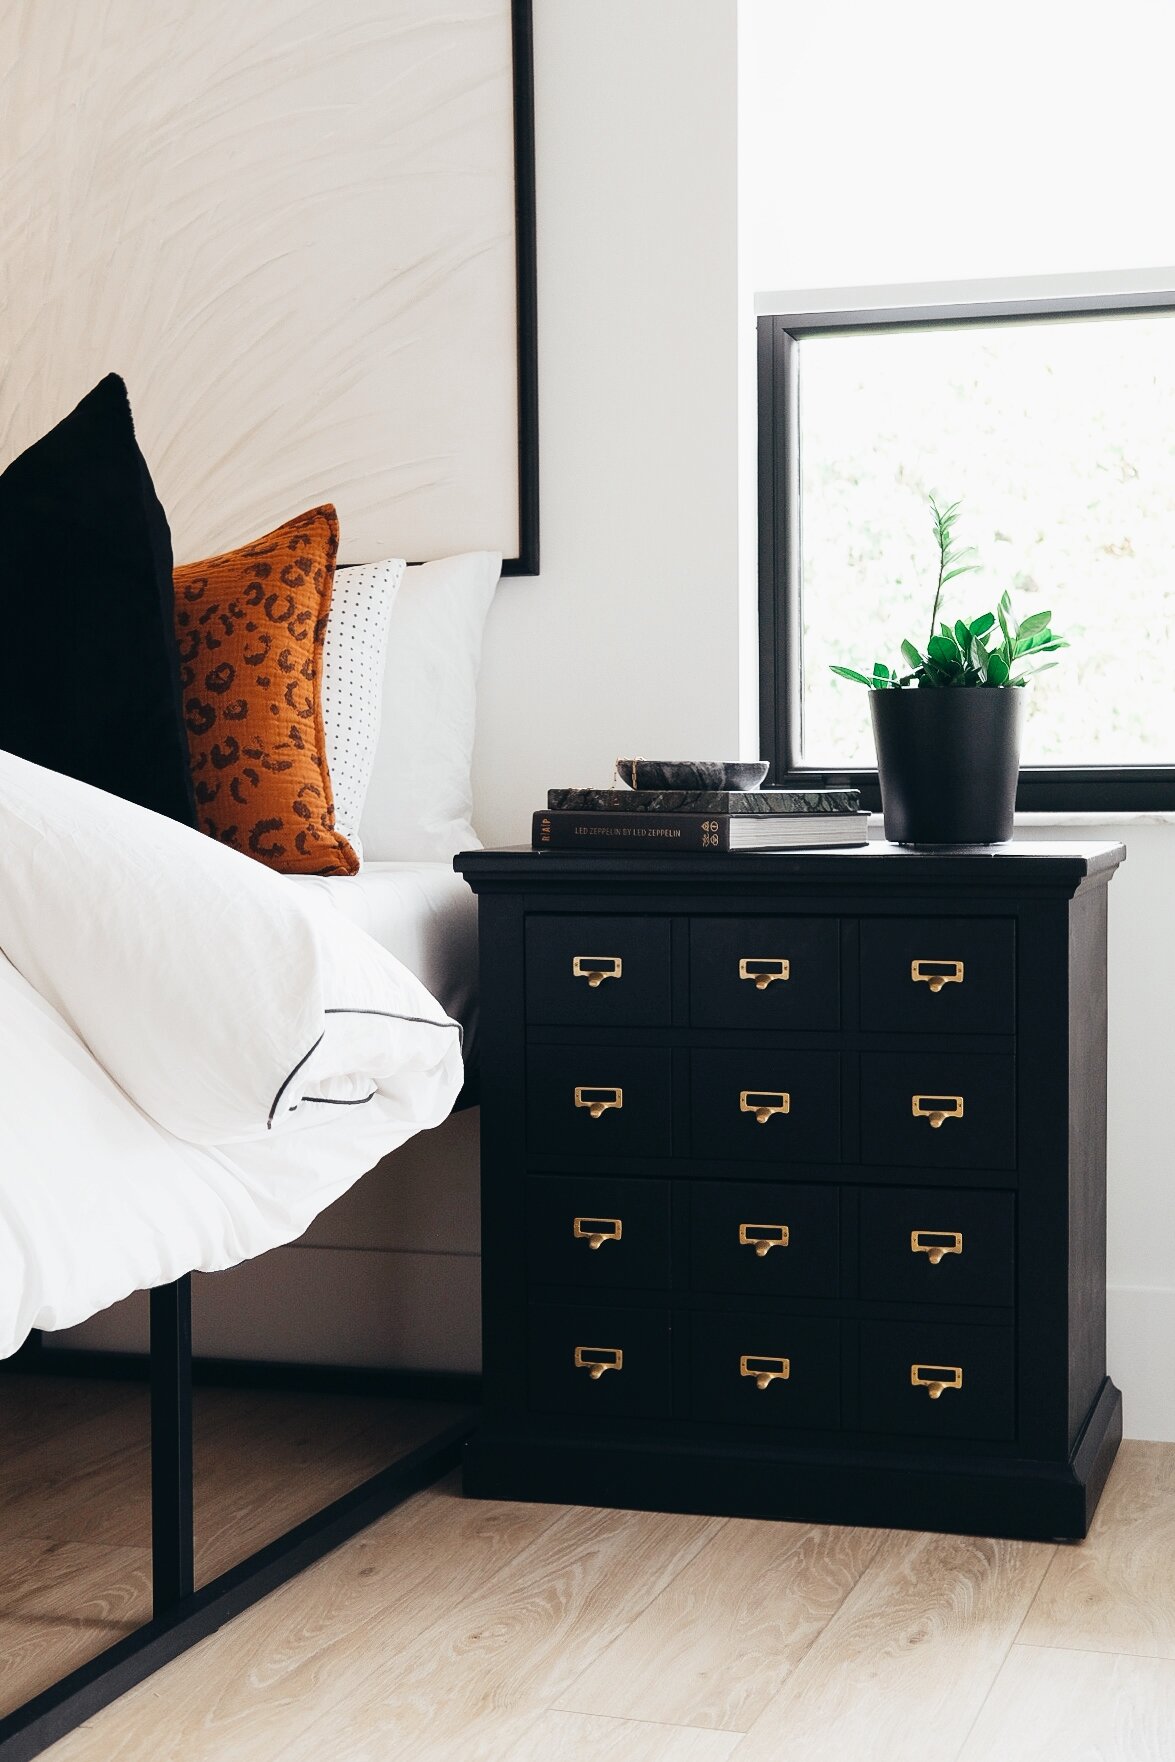 How To Paint Furniture Matte Black, How To Paint A Wood Dresser Black